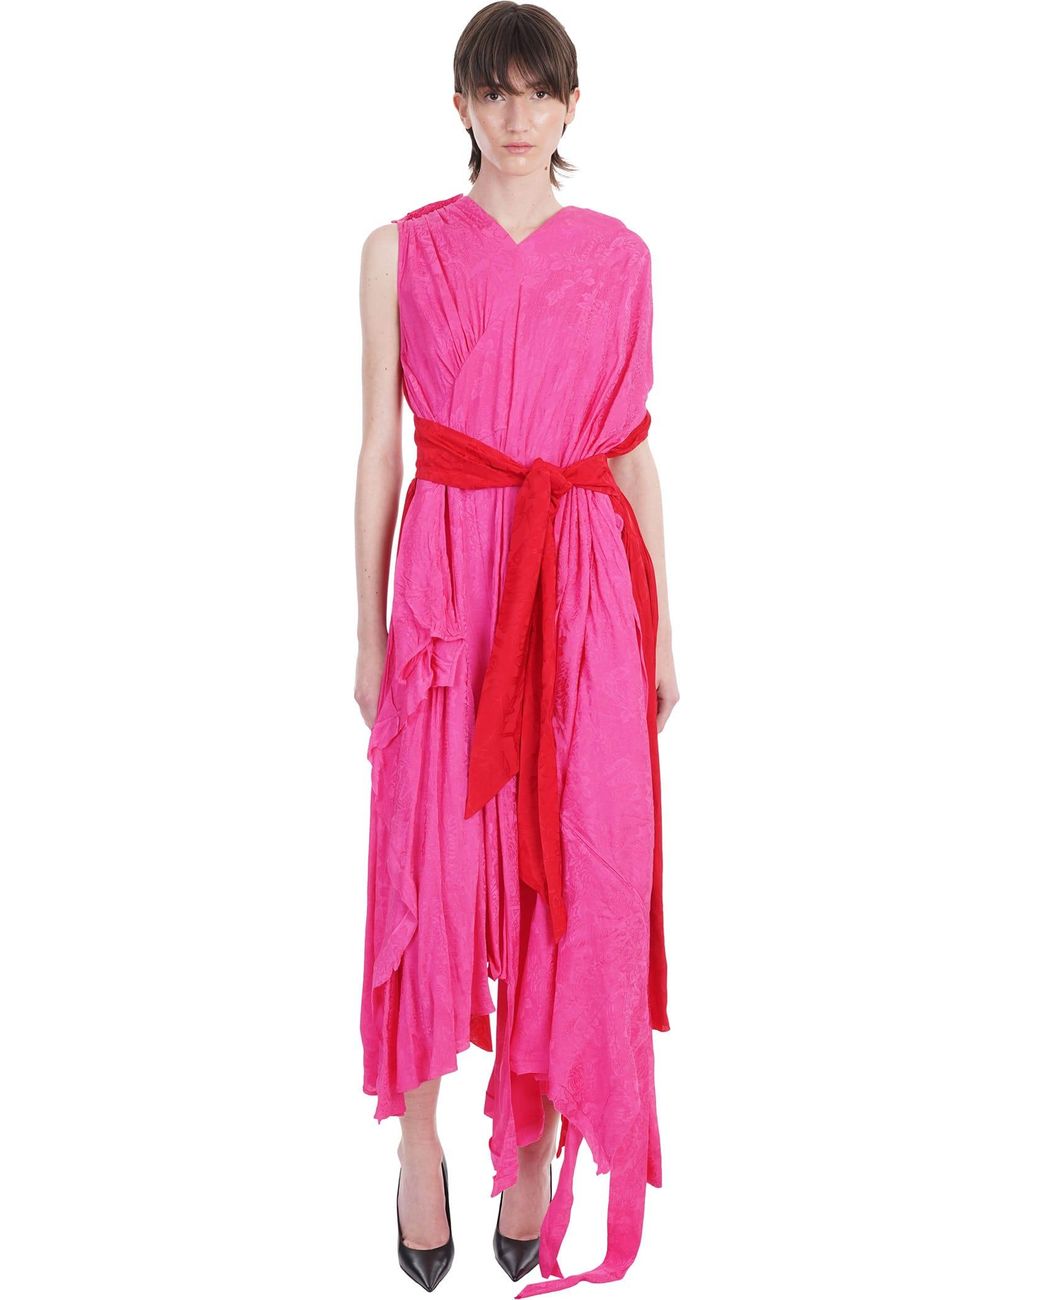 Balenciaga Synthetic Dress In Rose-pink Viscose | Lyst